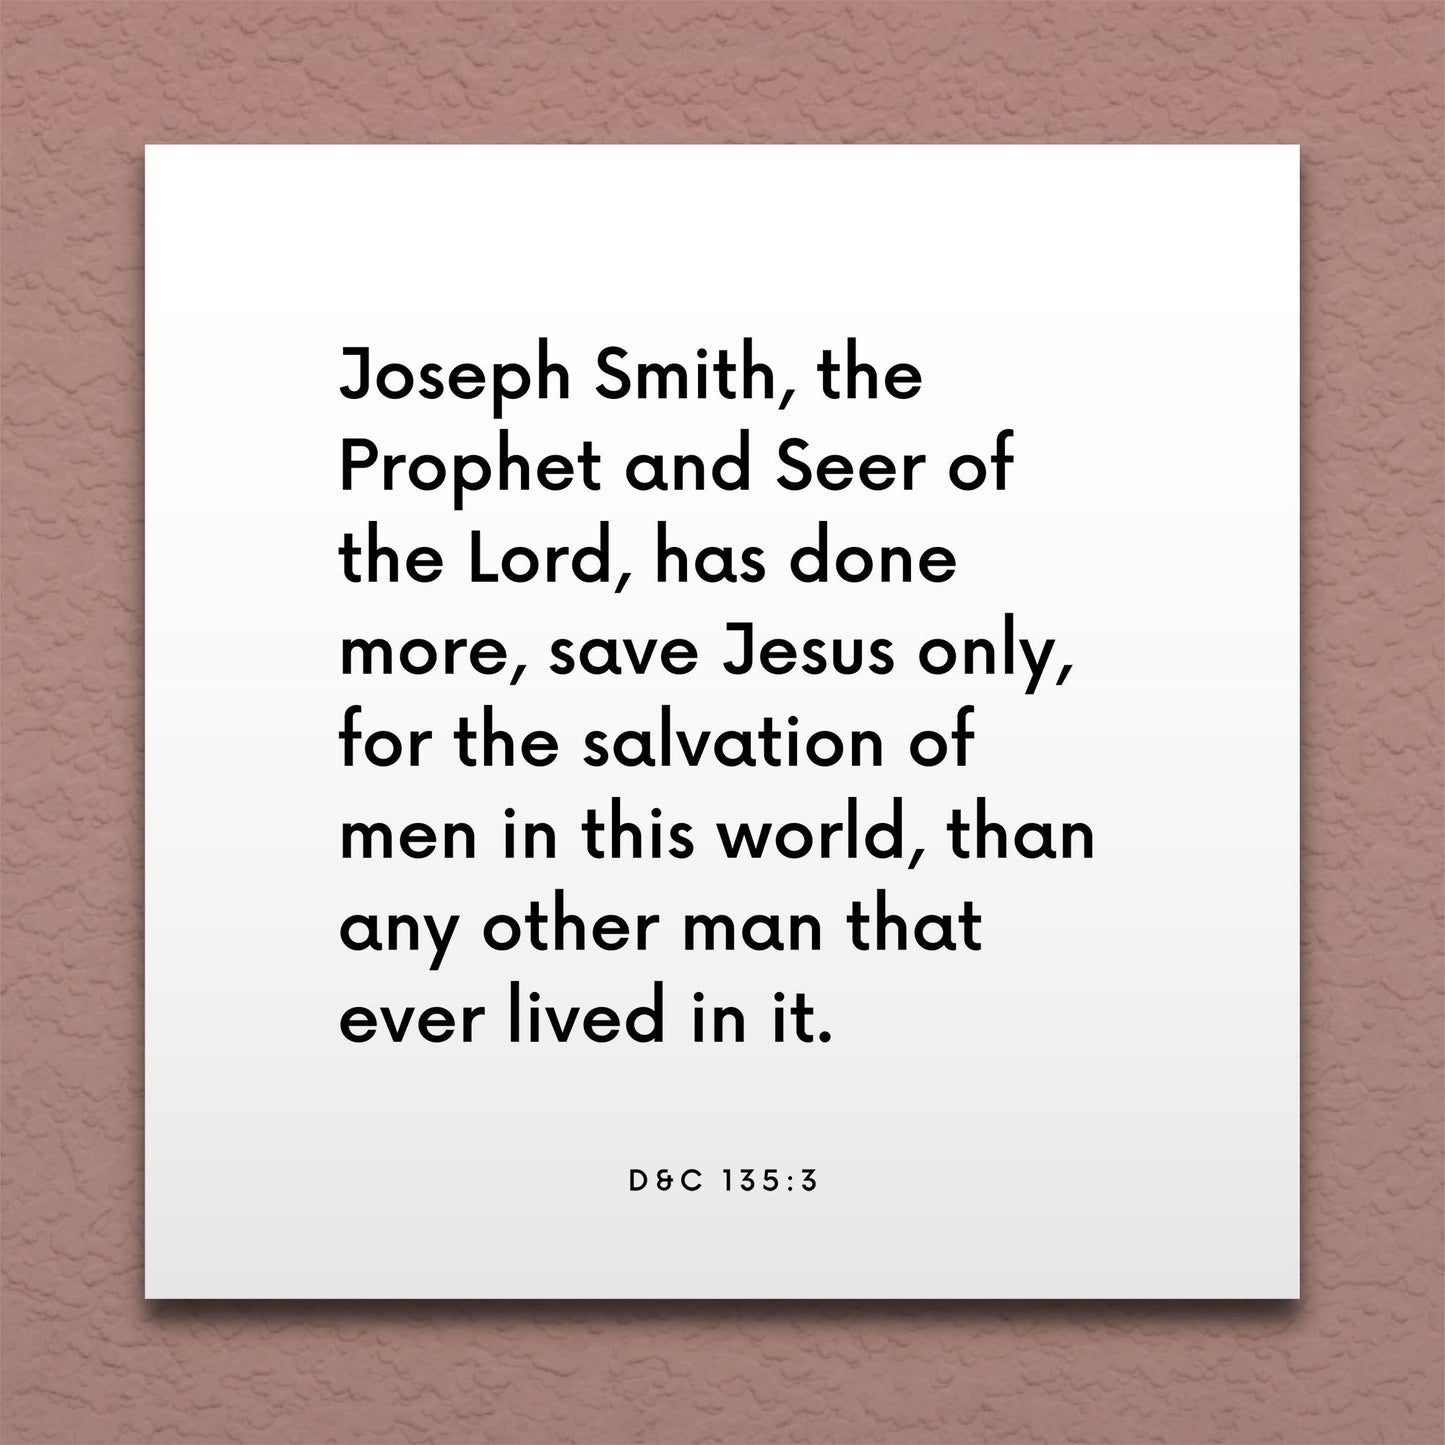 Wall-mounted scripture tile for D&C 135:3 - "Joseph Smith, the Prophet and Seer of the Lord"